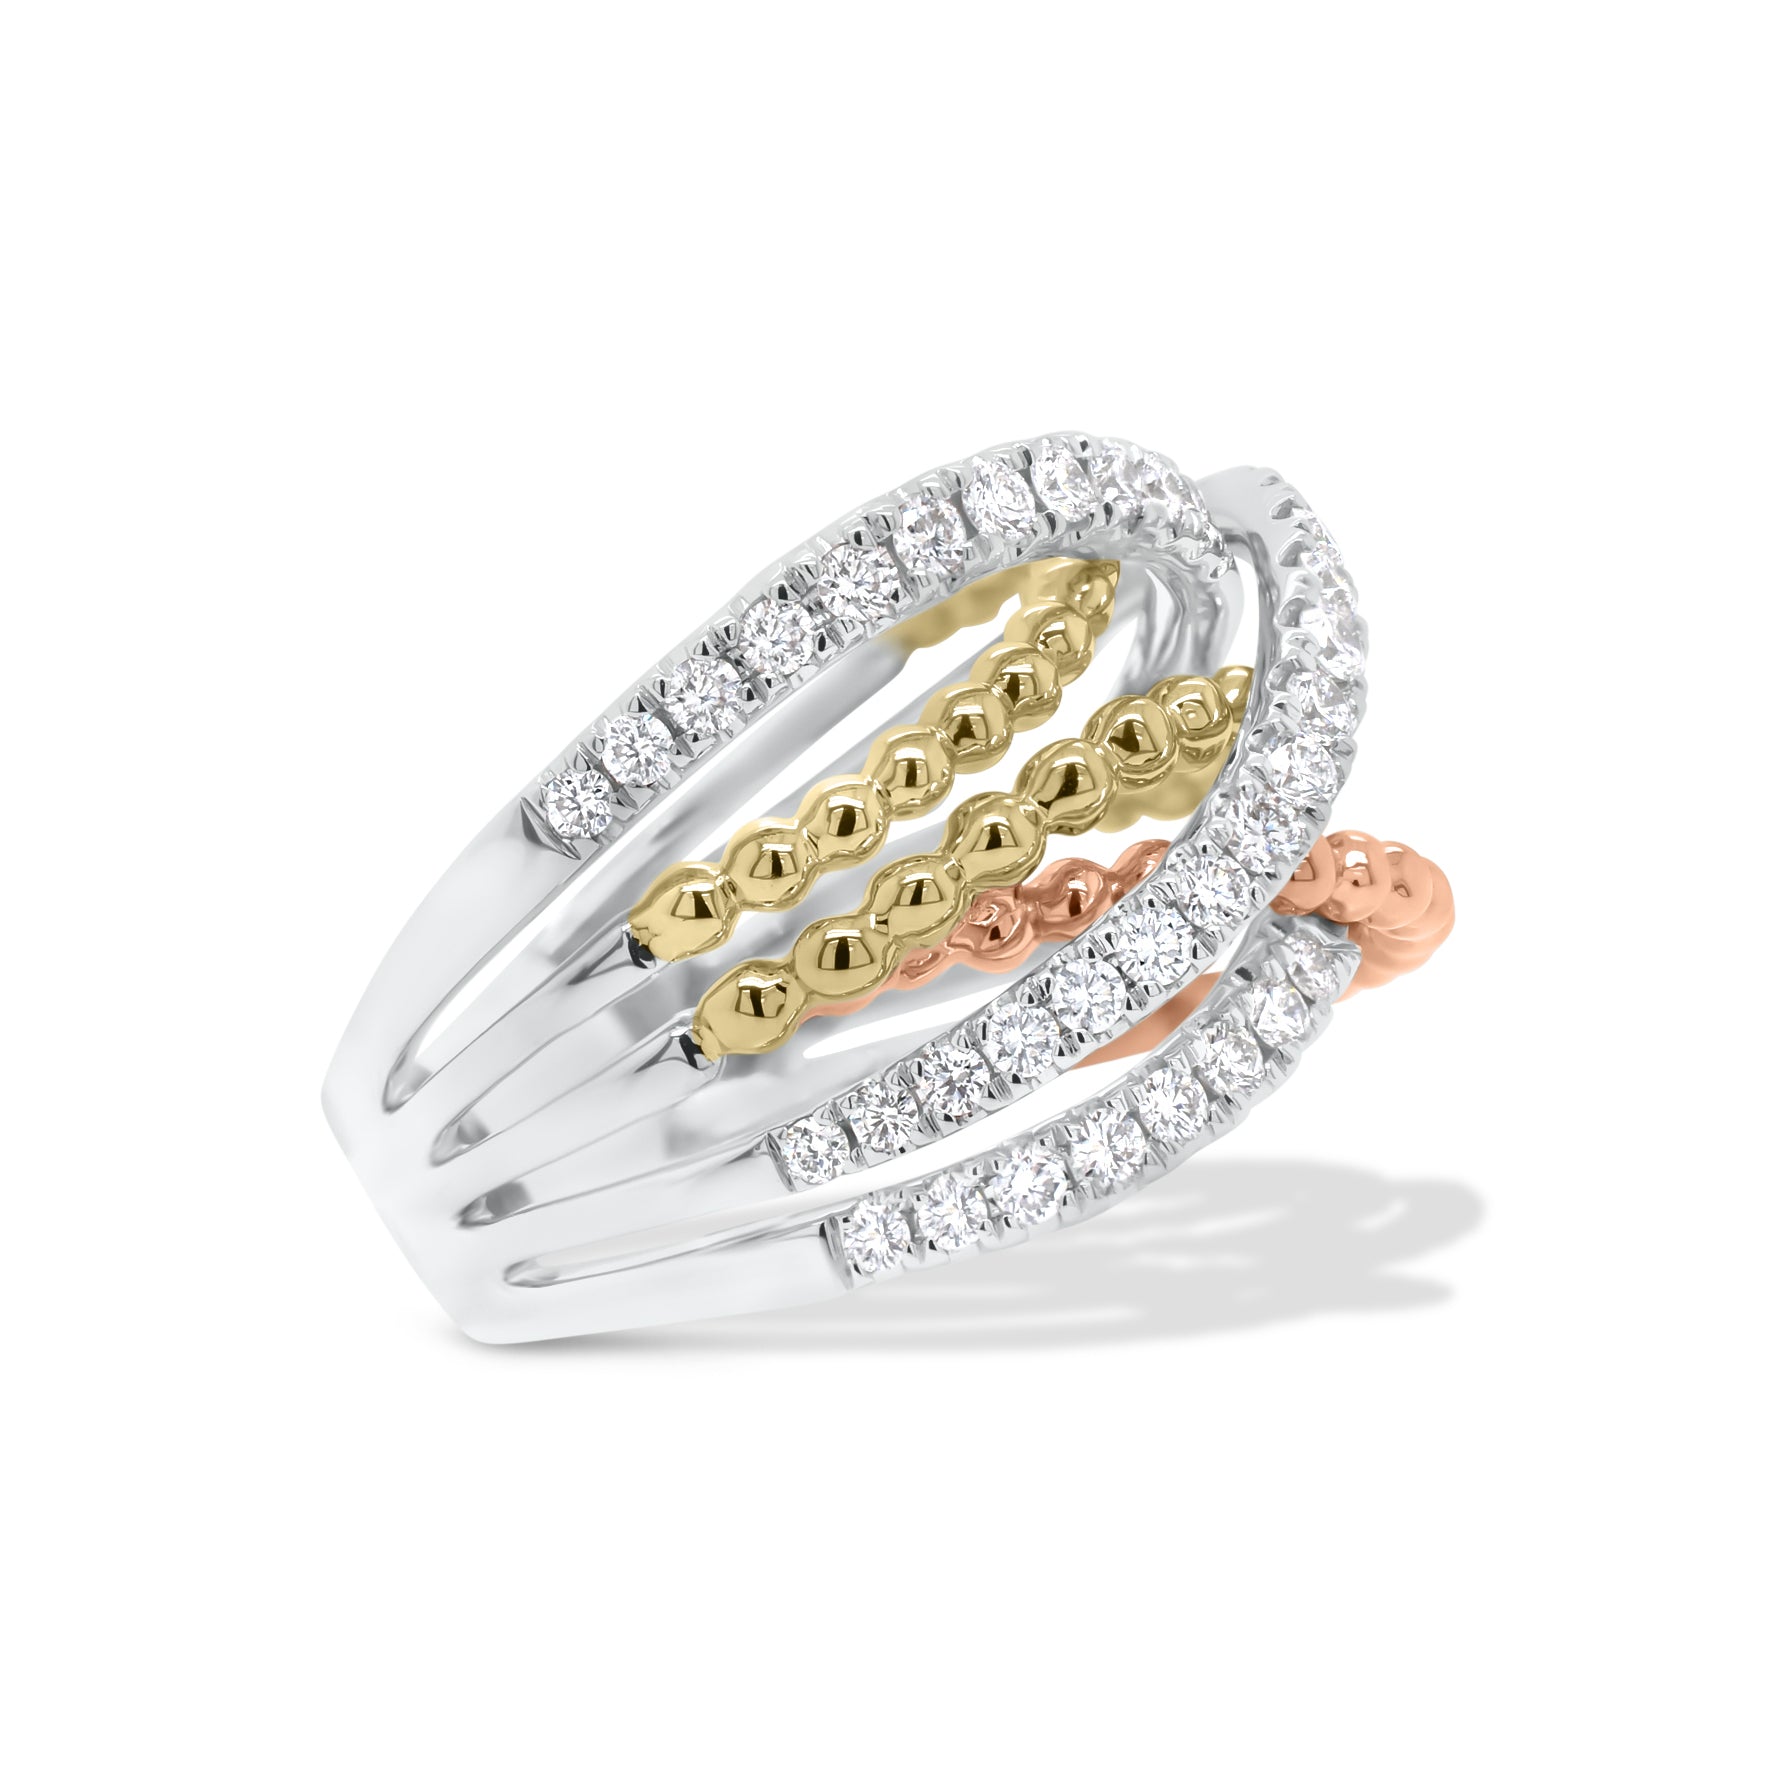 Diamond & Beaded Gold Interwoven Bands Ring  - 14K gold weighing 8.03 grams  - 51 round diamonds totaling 0.74 carats